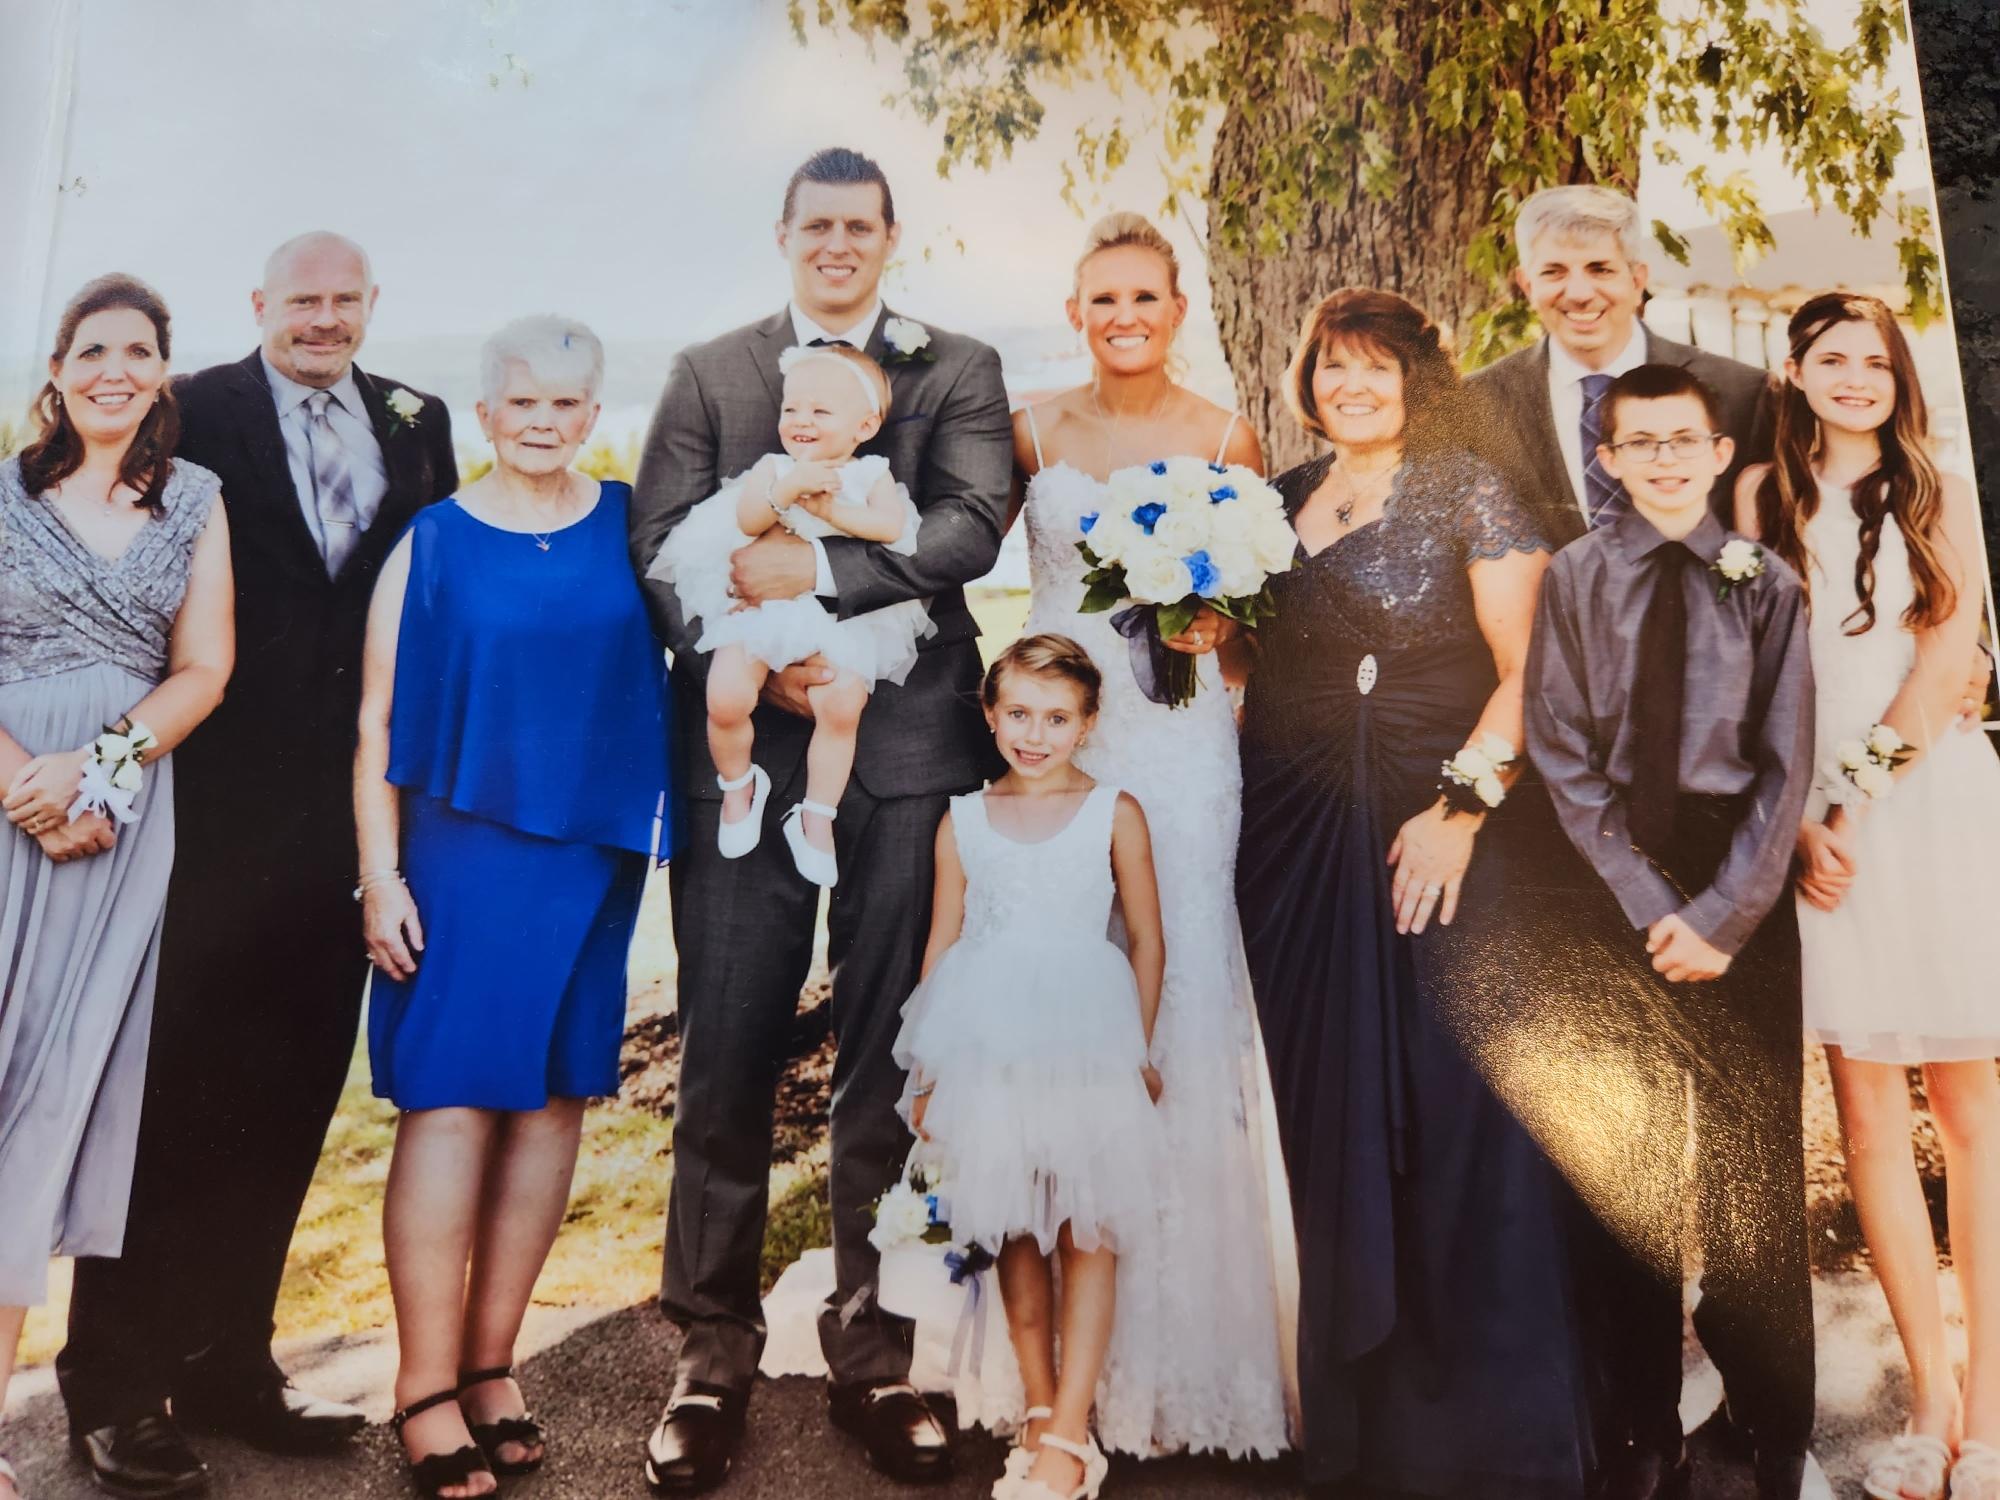 David Priolo and his family at a wedding